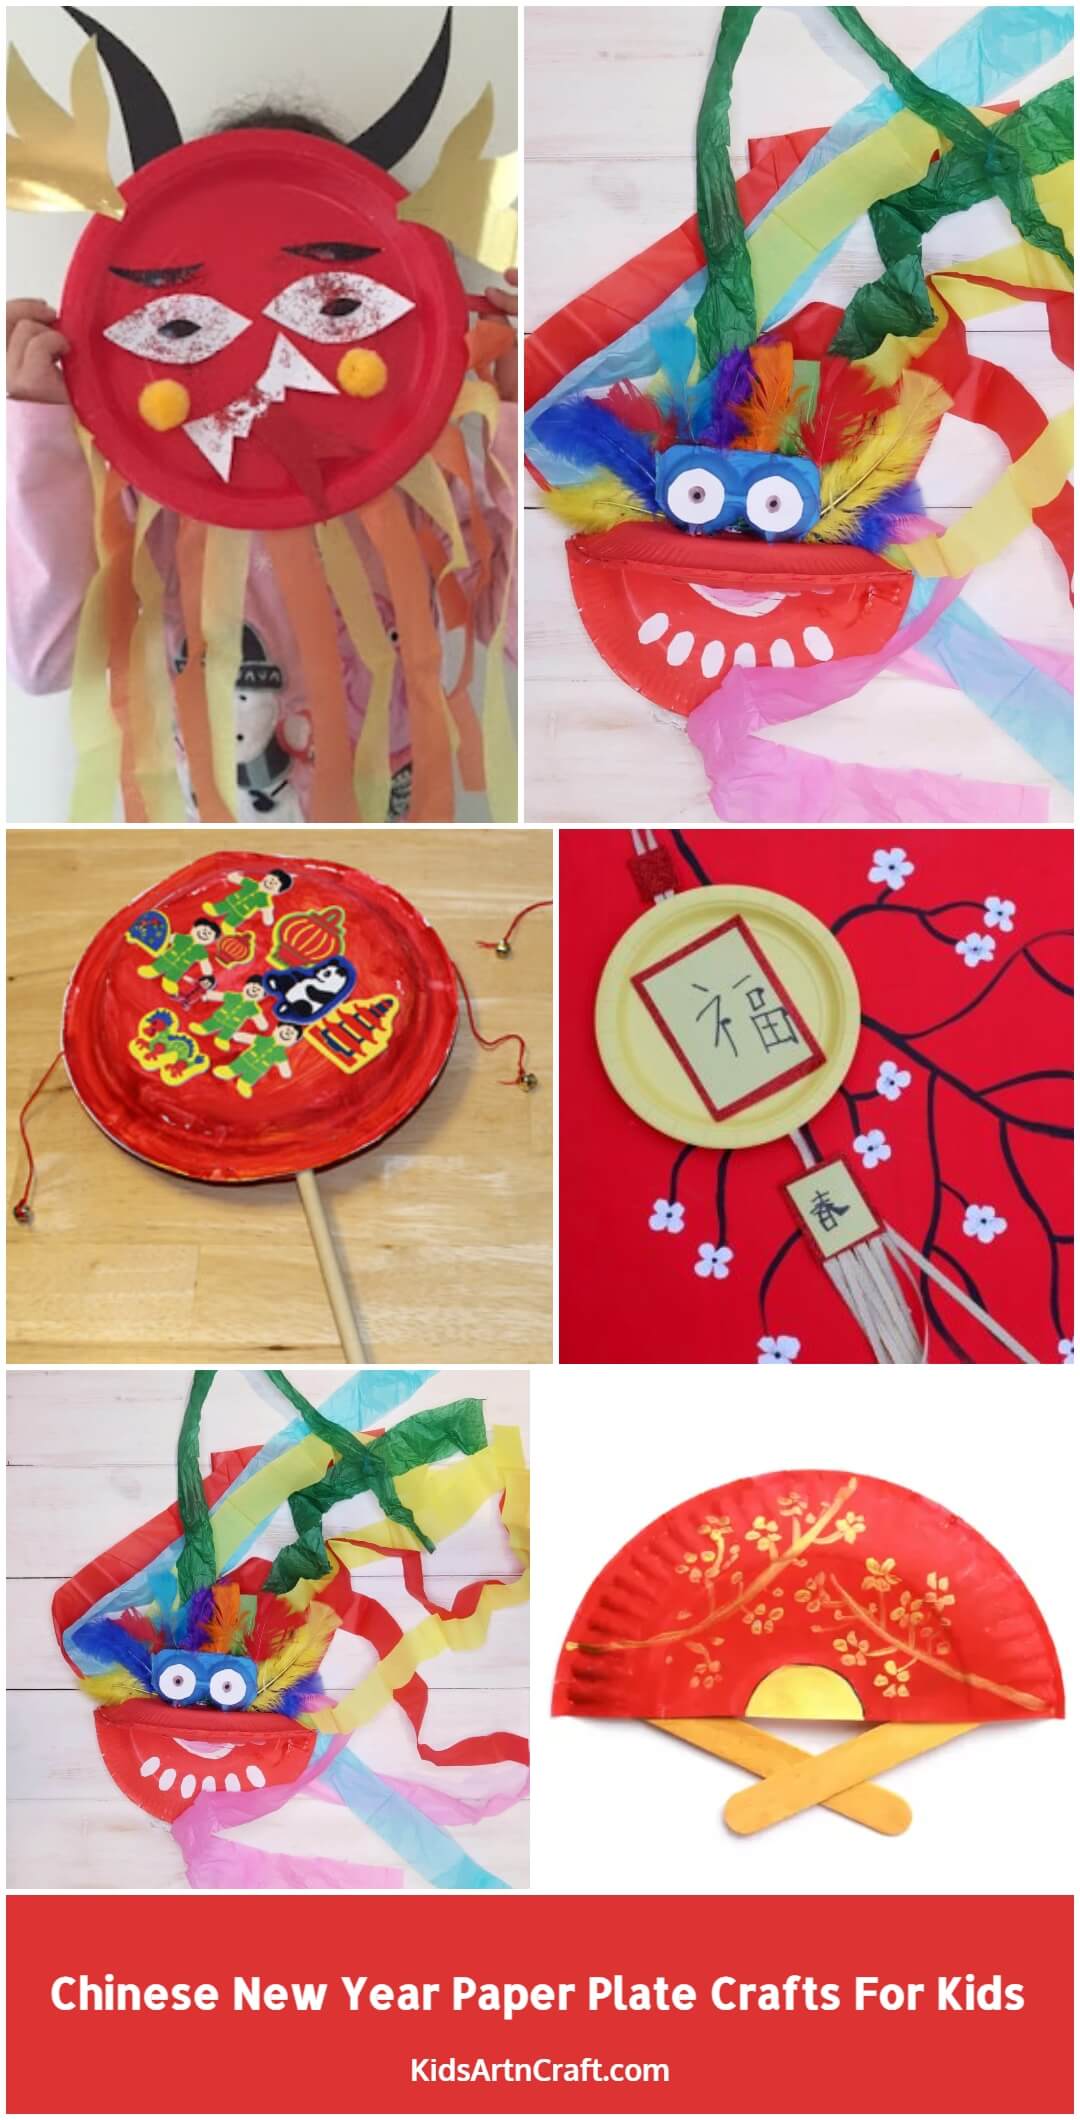 Chinese New Year Paper Plate Crafts For Kids